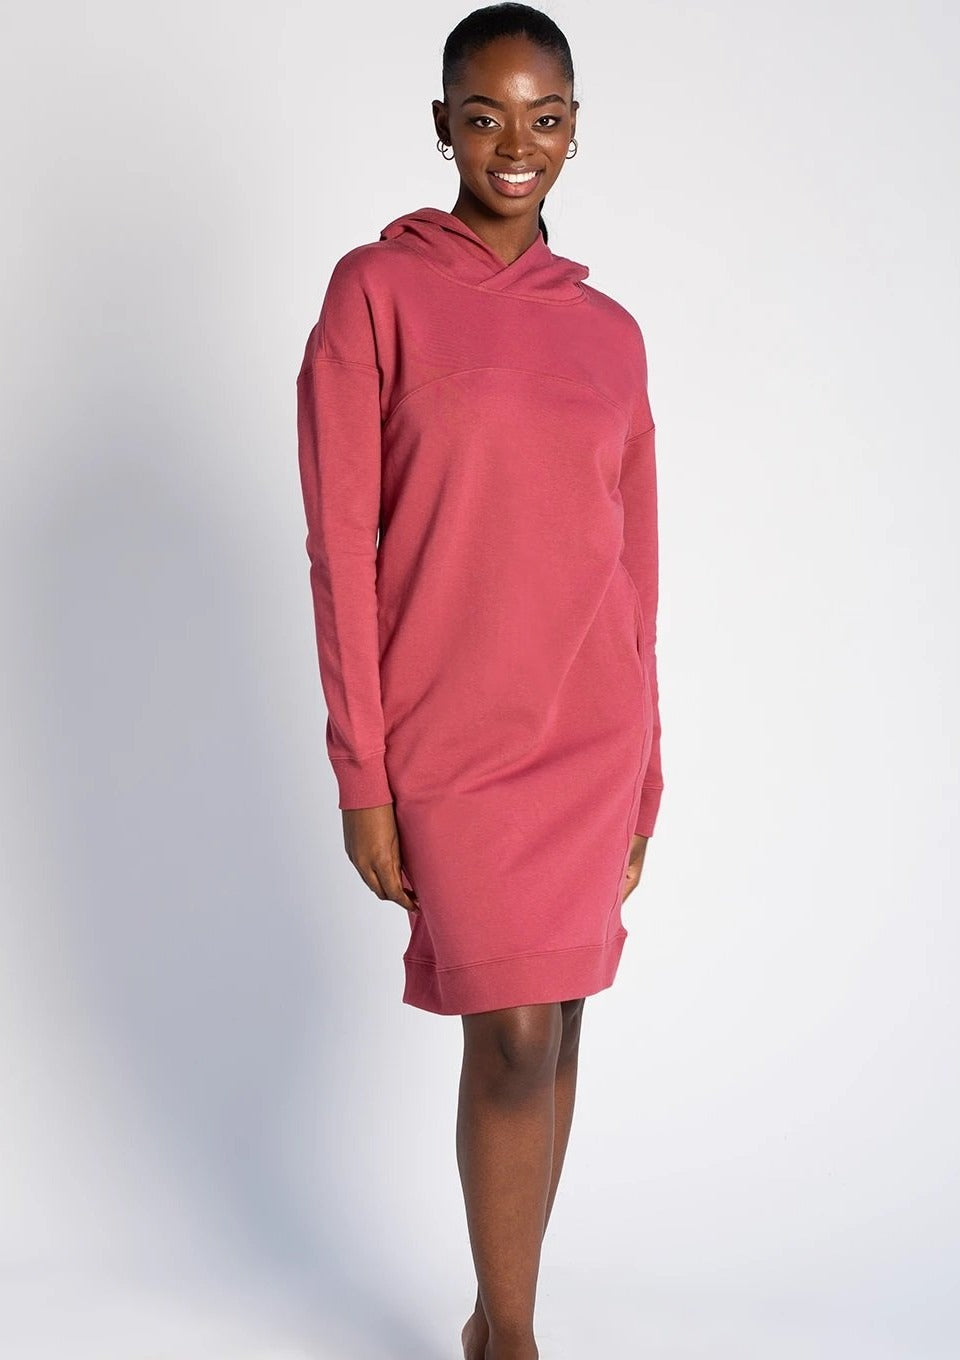 Slip into the Ariel Hoodie Dress with a pair of leggings for an effortless outfit this season. The Ariel Hoodie Dress has been designed with a styling front seam detail, a cozy hood, relaxed drop shoulder, and pockets to provide warmth, style, and practicality. TERRERA colour Deep Rose $115.00